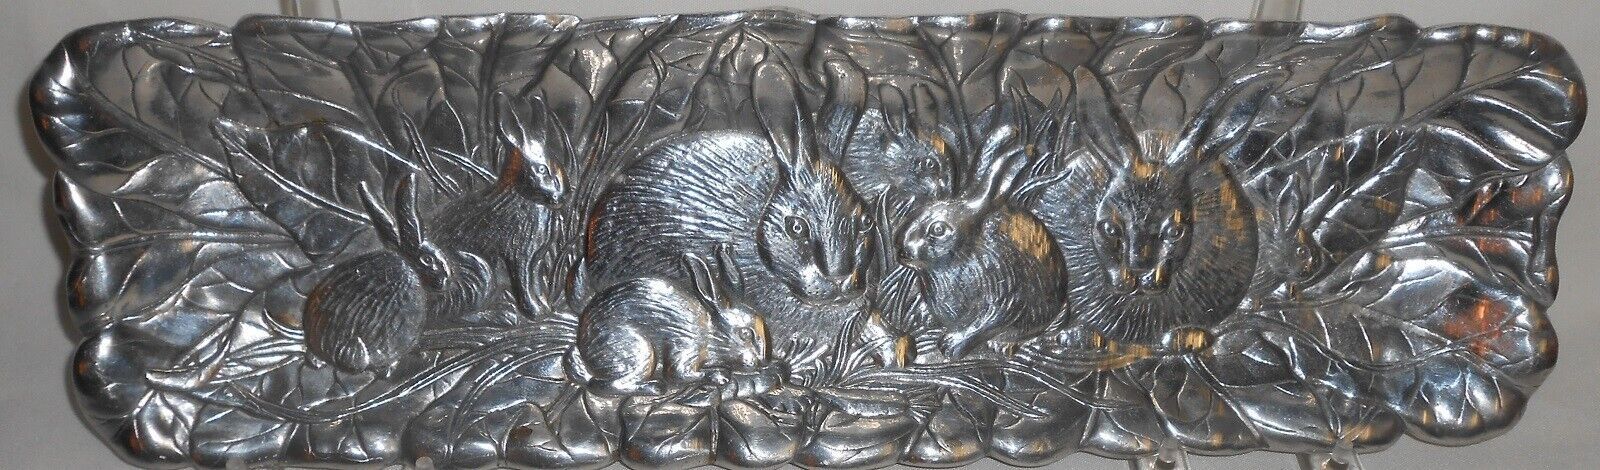 Primary image for 1990 Arthur Court Long 18 1/4" x 5 5/8" RABBITS MOTIF Aluminum BREAD TRAY